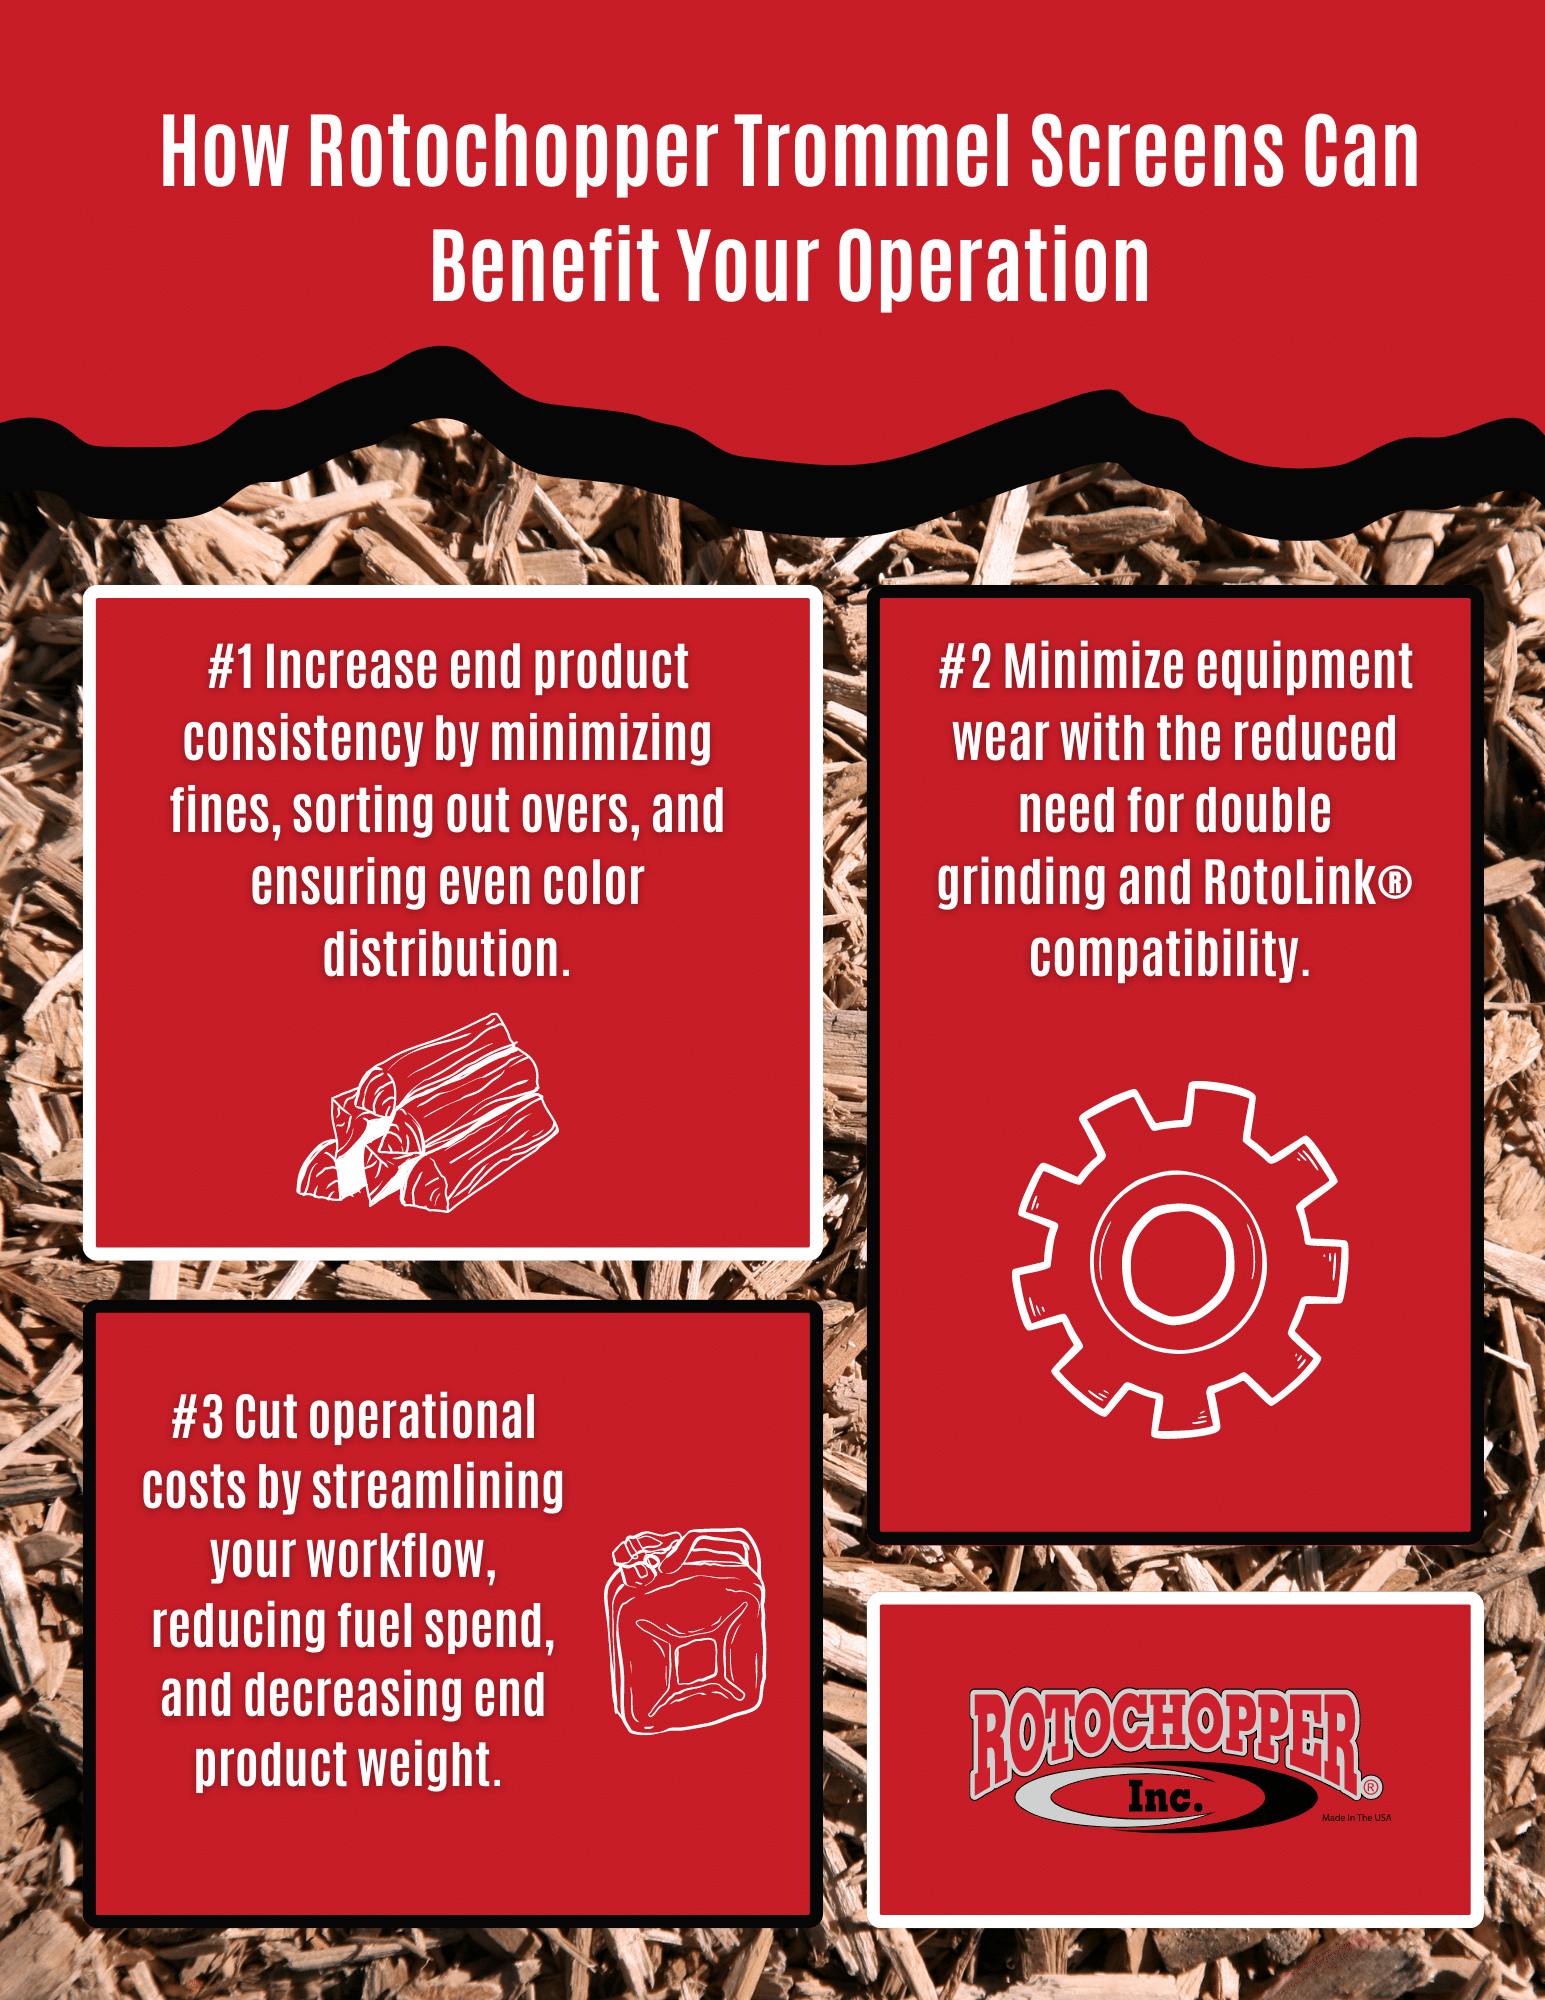 infographic depicting the benefits of a rotochopper trommel screen